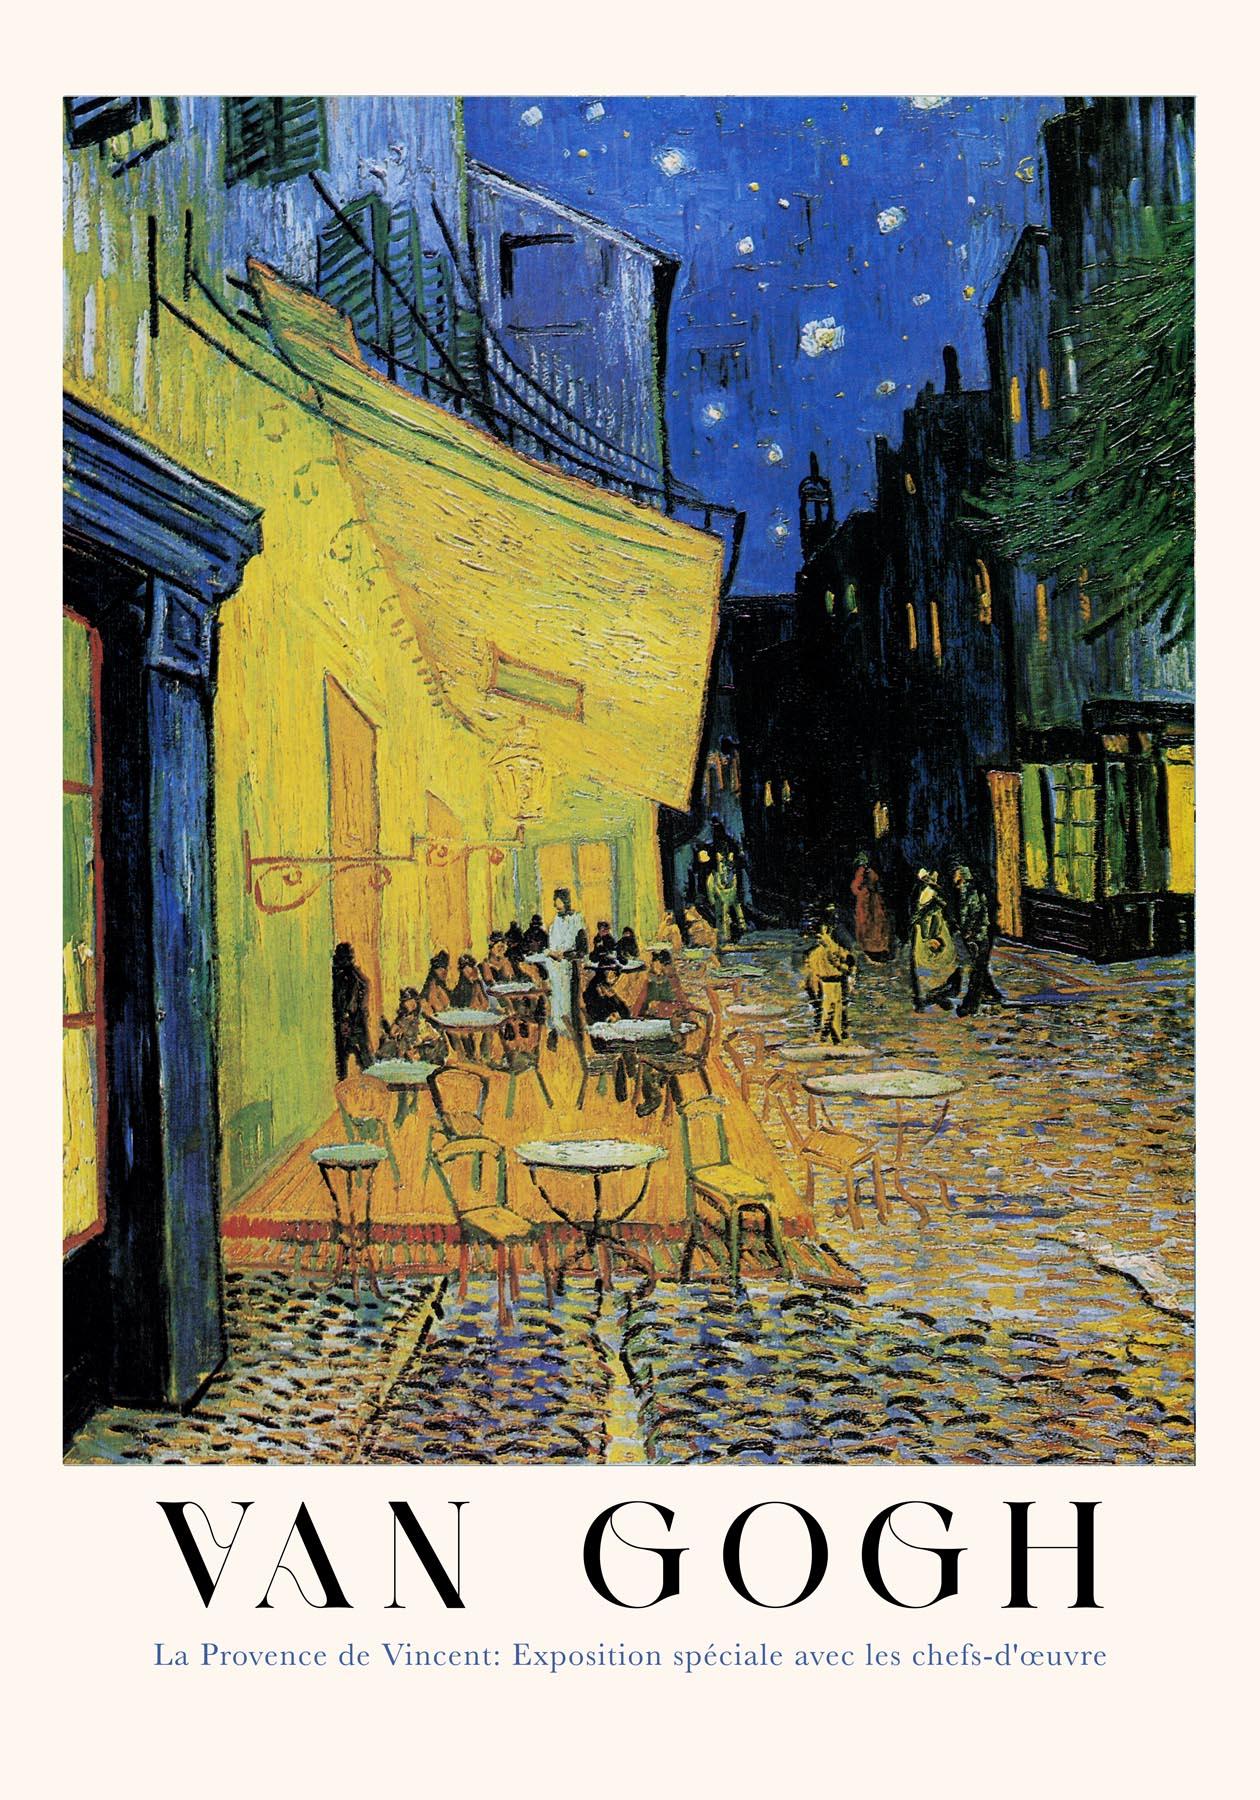 Cafe Terrace at night Art Poster by Van Gogh